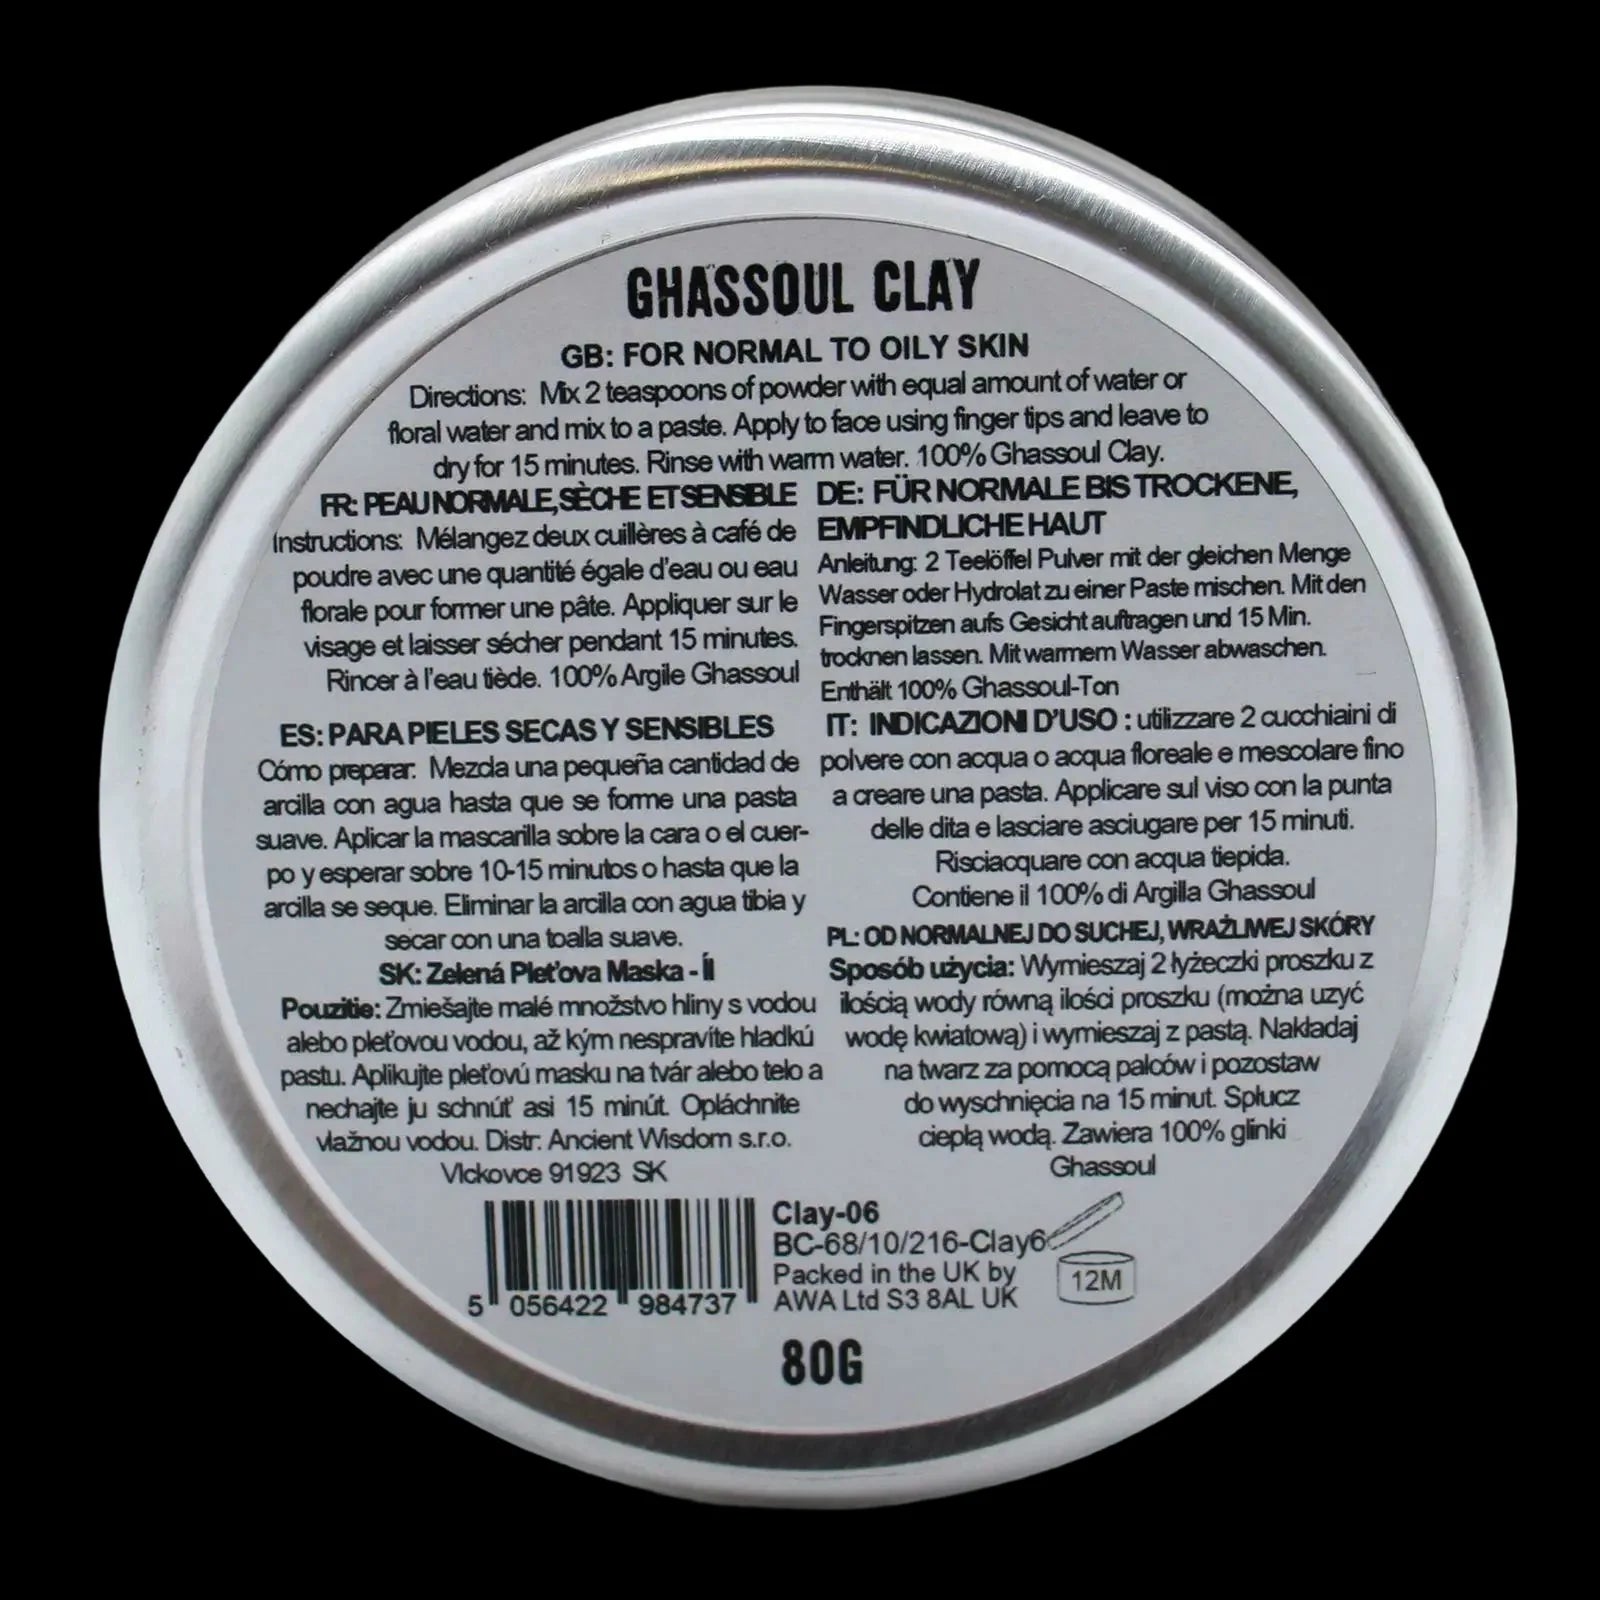 Ghassoul Clay Skin Mask 80g - Care Masks & Peels - Ancient